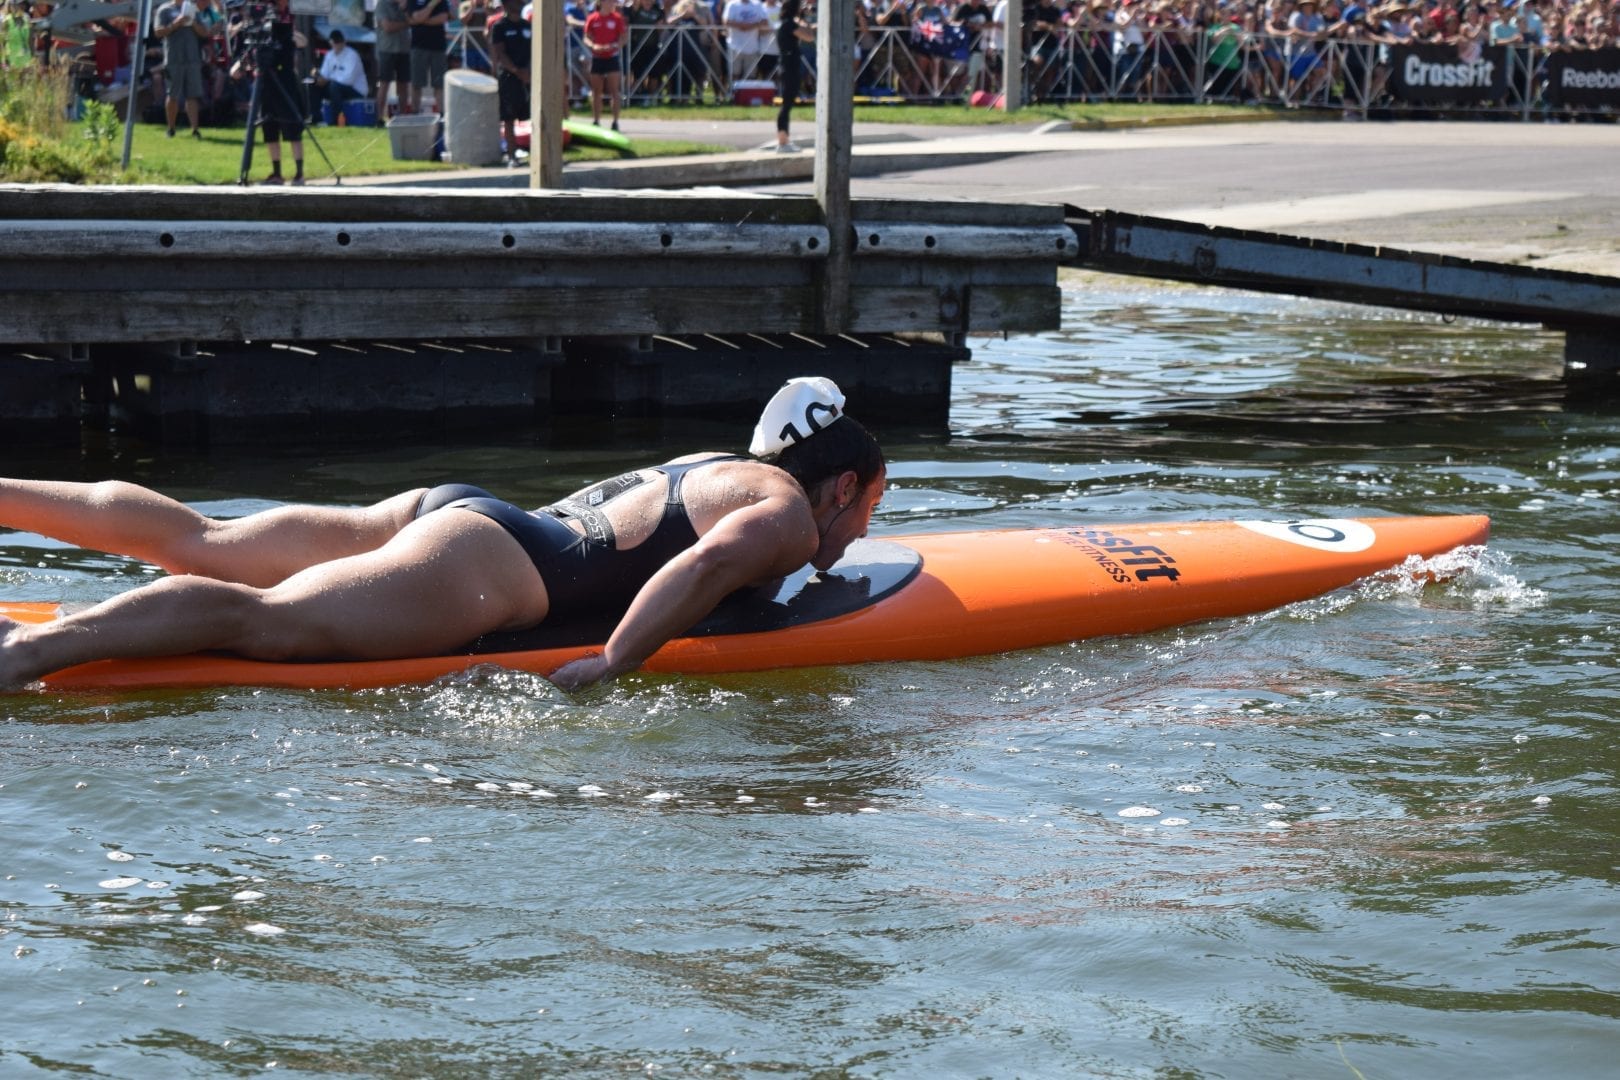 Bethany Shadburne of Streamline CrossFit completes the Swim Paddle event at the 2019 CrossFit Games